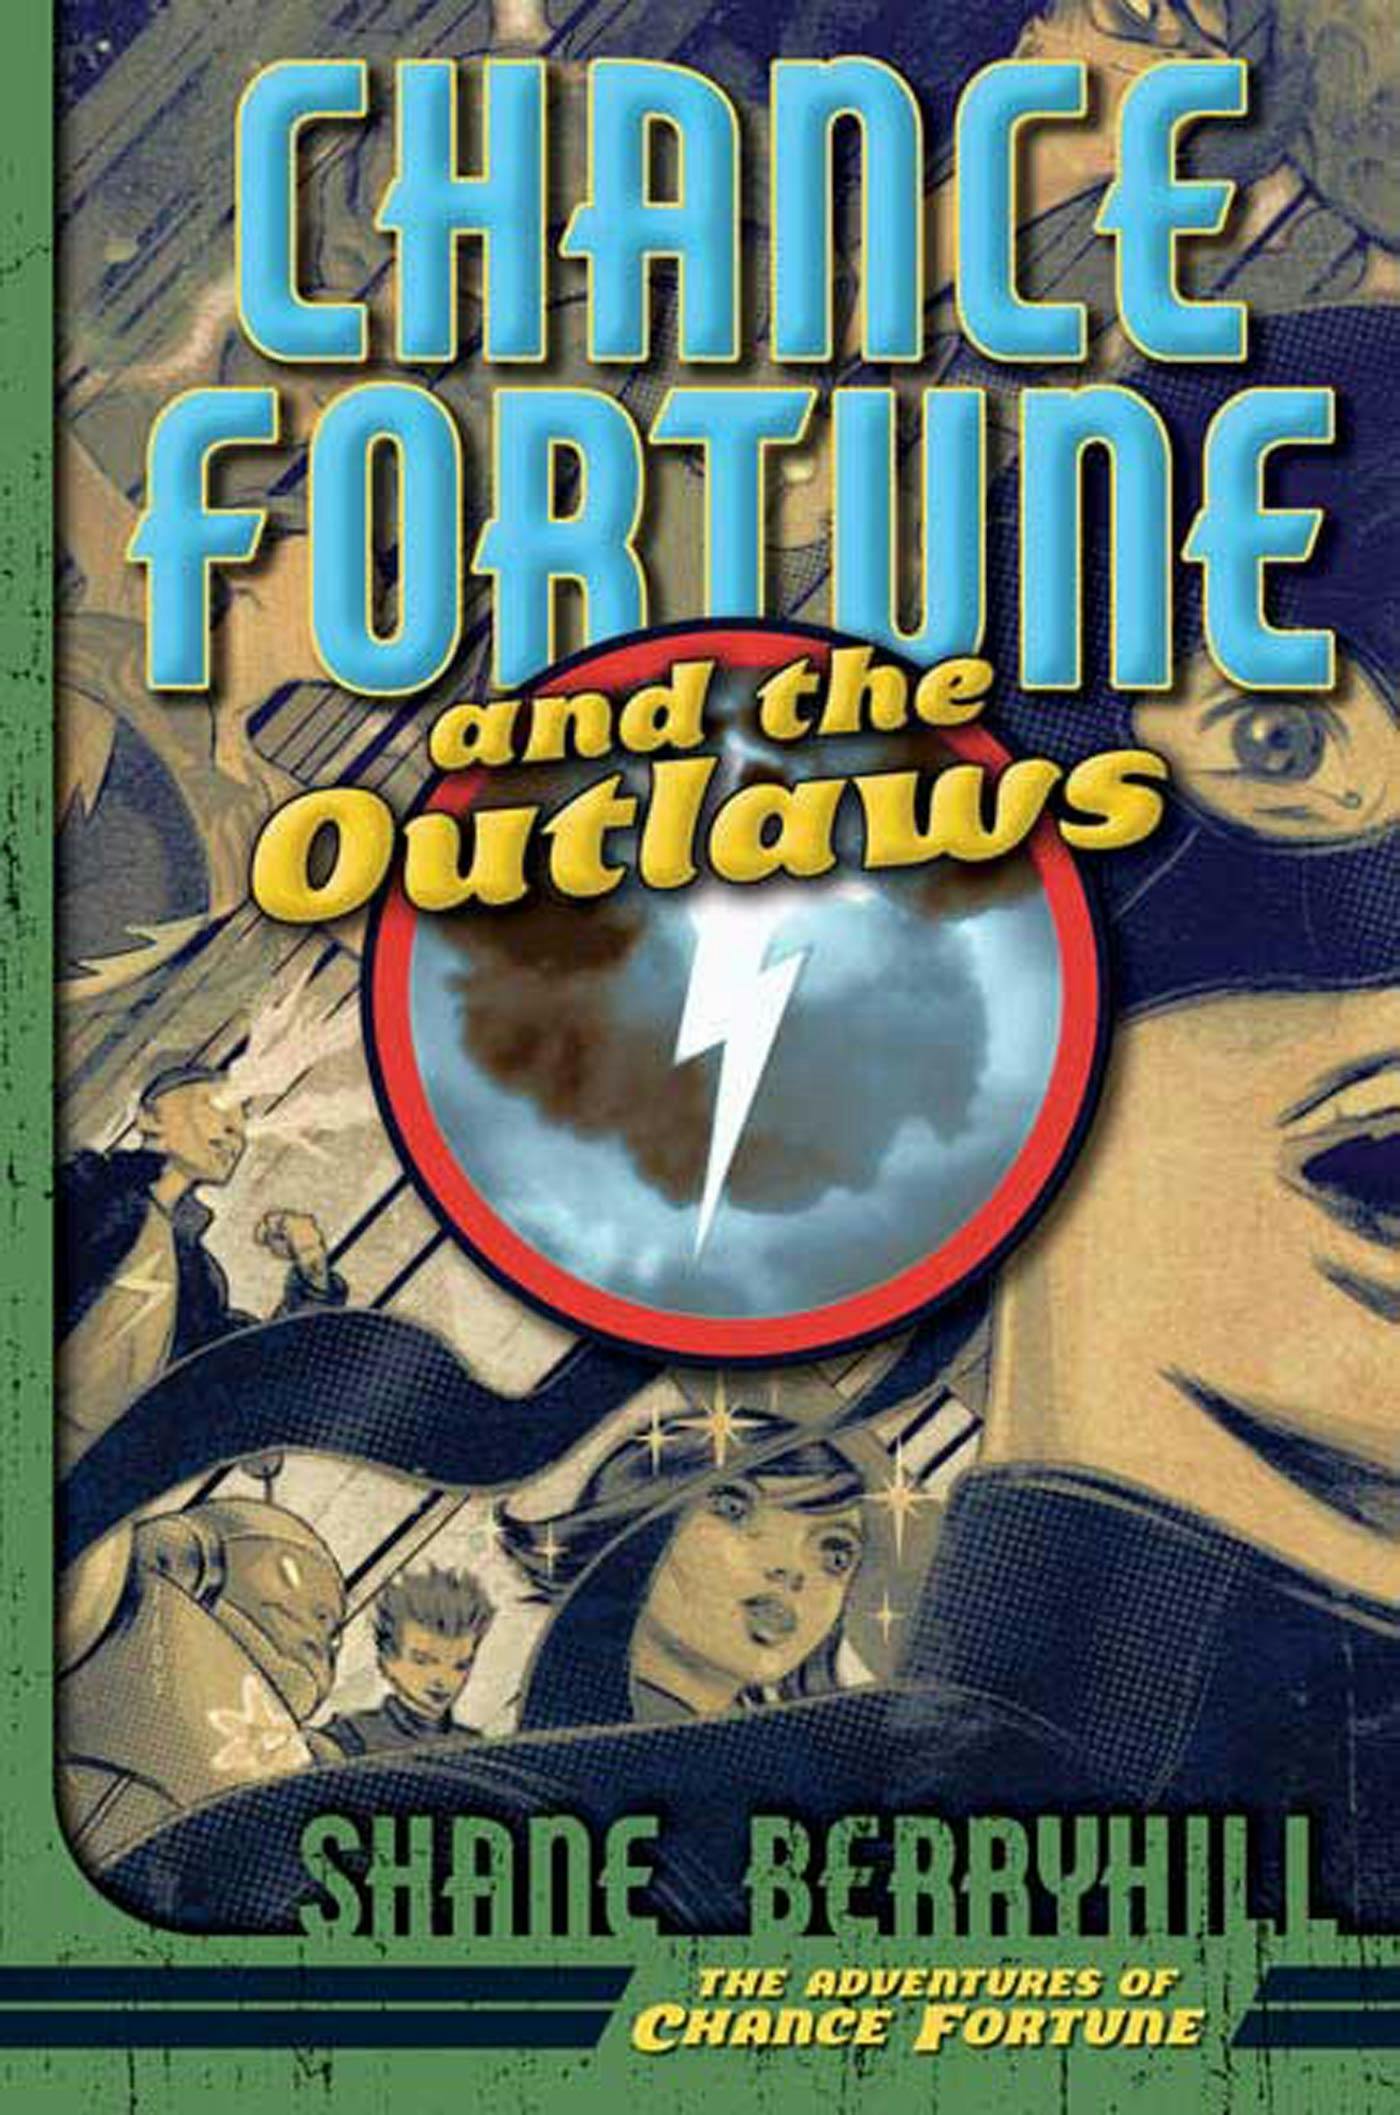 Cover for the book titled as: Chance Fortune and the Outlaws